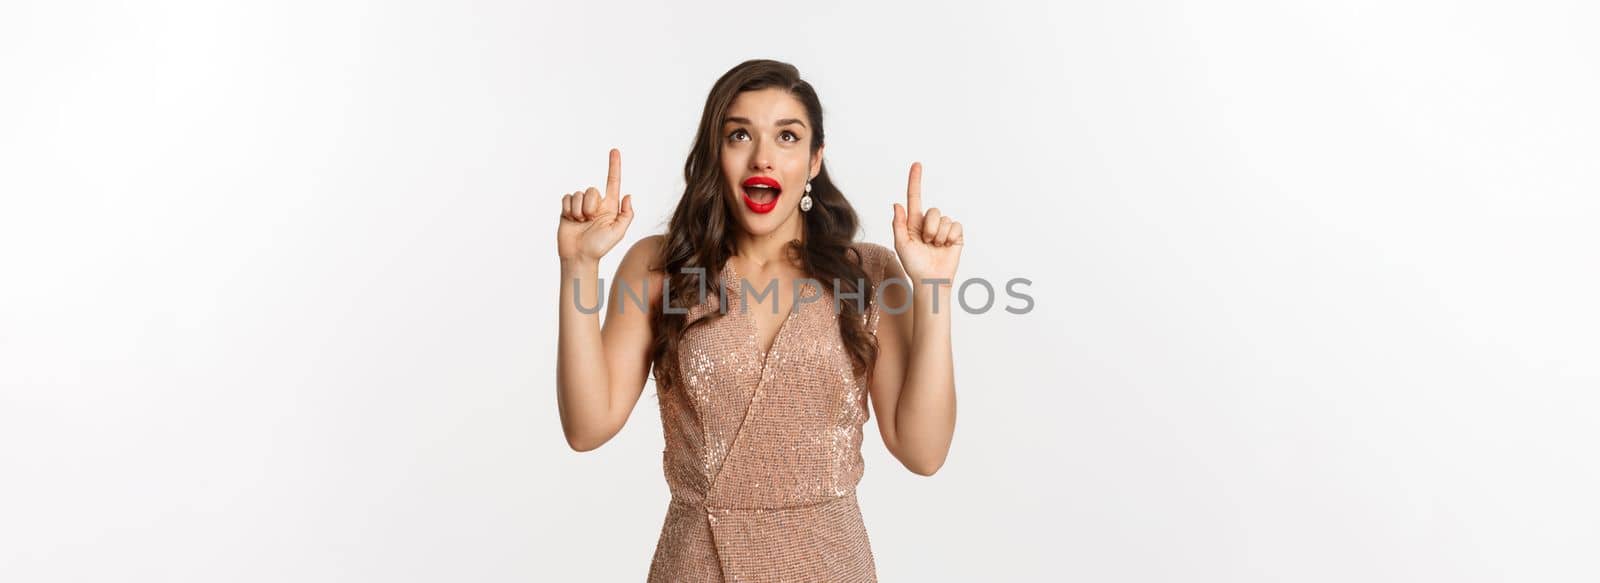 New Year, christmas and celebration concept. Excited beautiful woman showing advertisement, gasping amazed, wearing party dress and pointing up, white background.